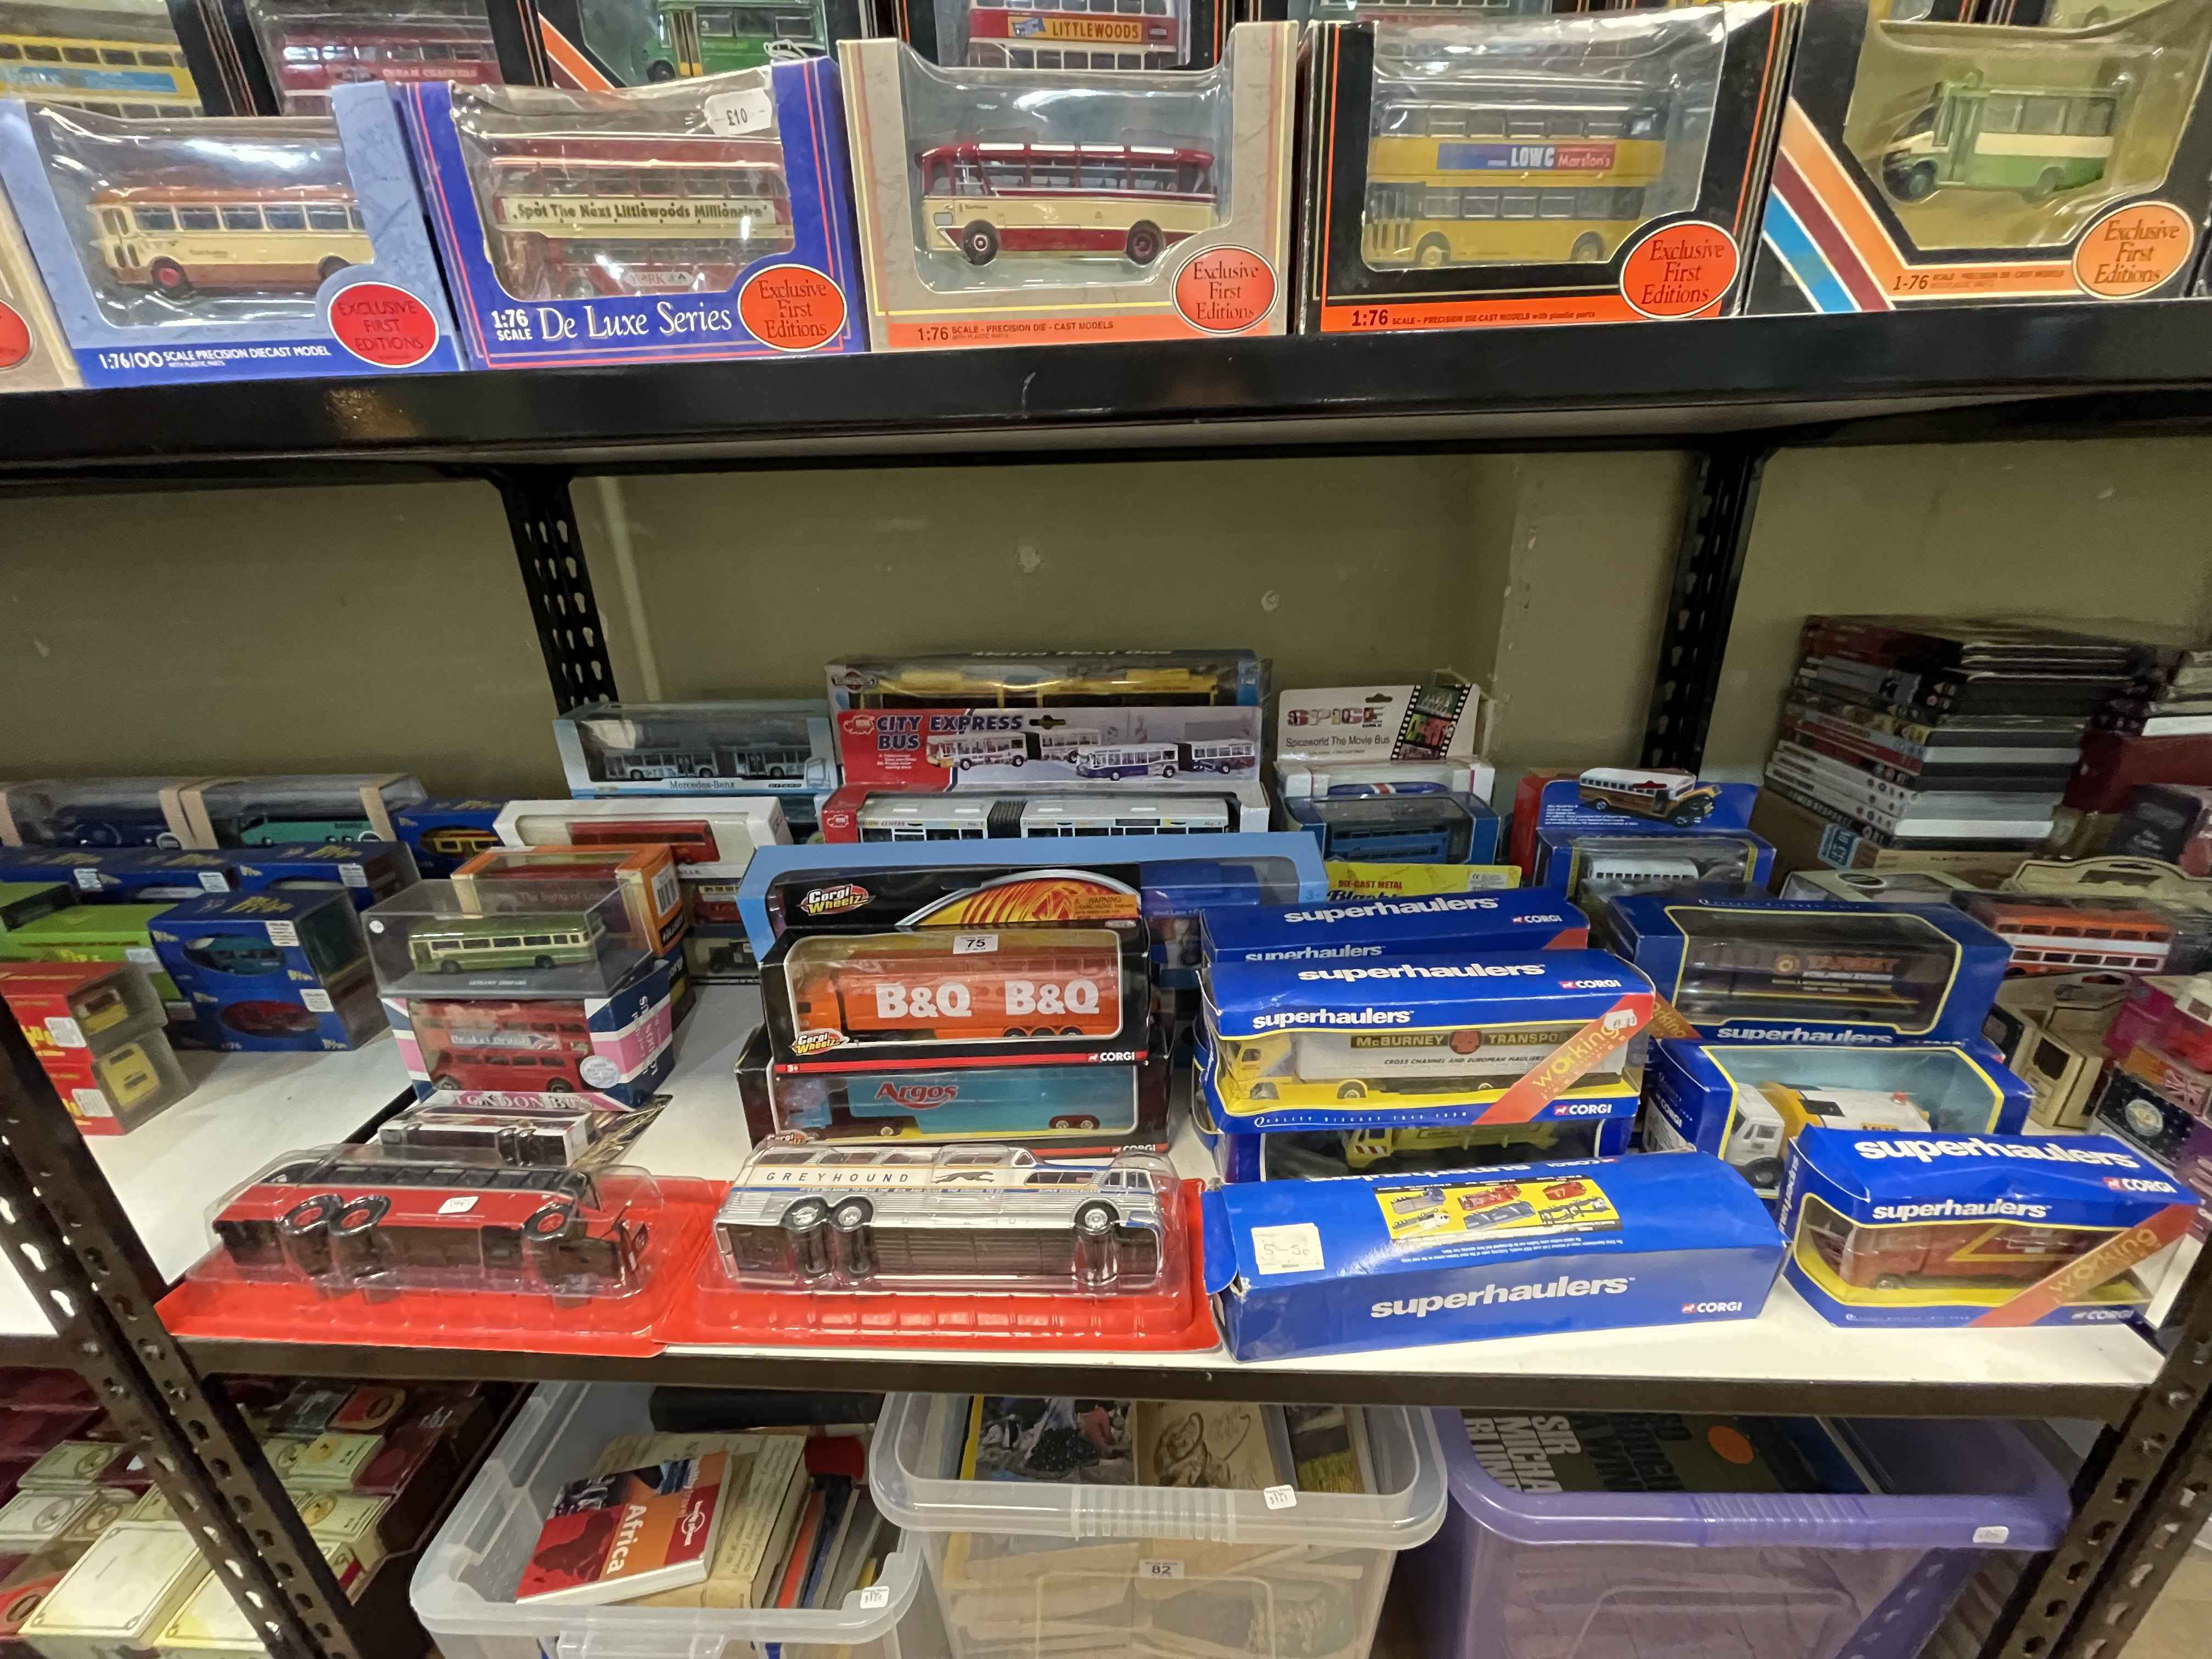 Over 40 boxed mostly 1:76 Diecast Omnibuses by Corgi, Dickie, Husky and others.